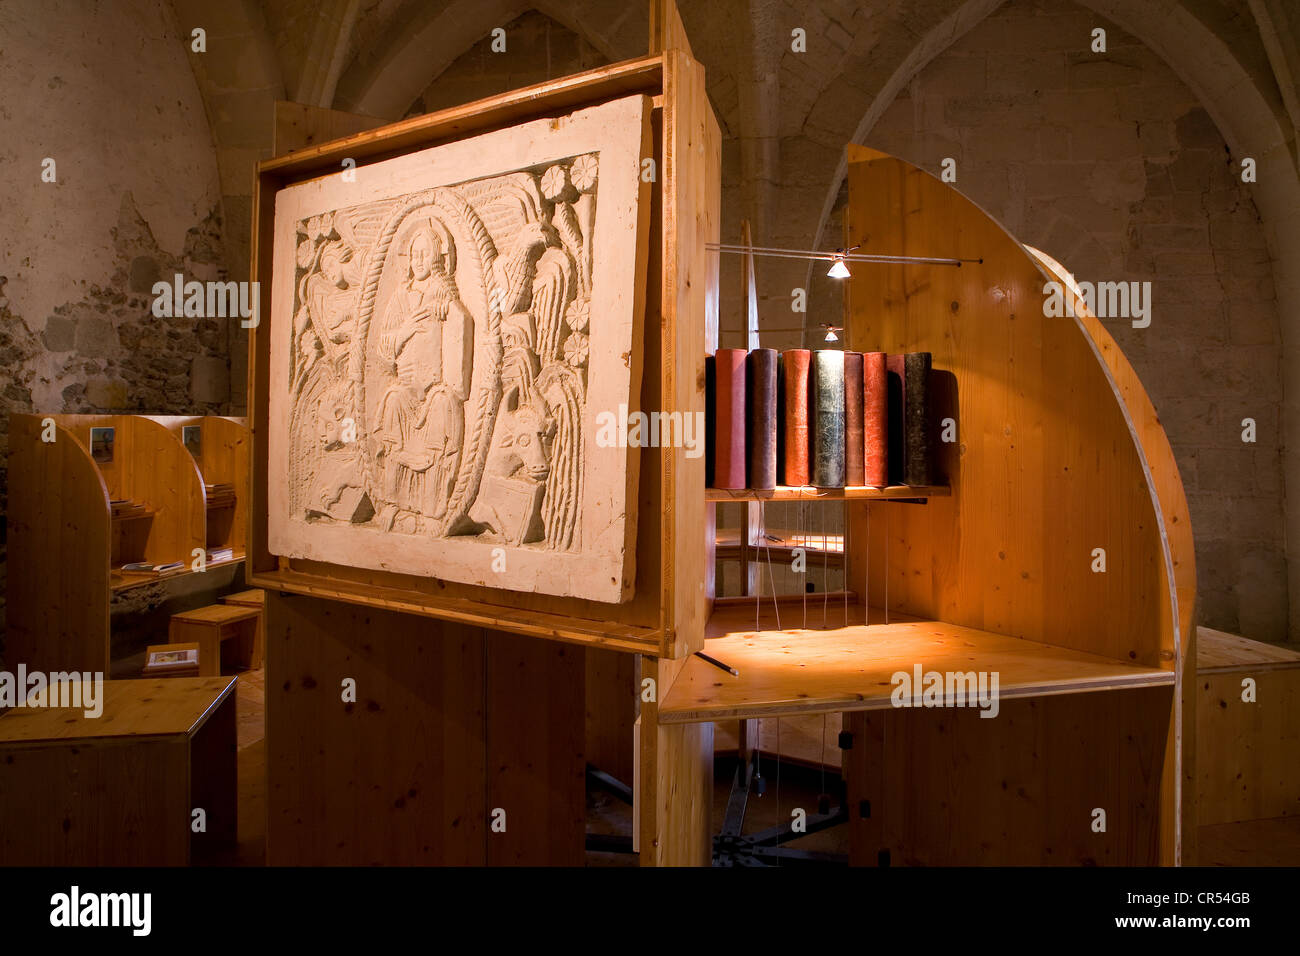 France, Seine et Marne, Jouarre, Romanesque tower reading room of the Benedictine abbey Stock Photo